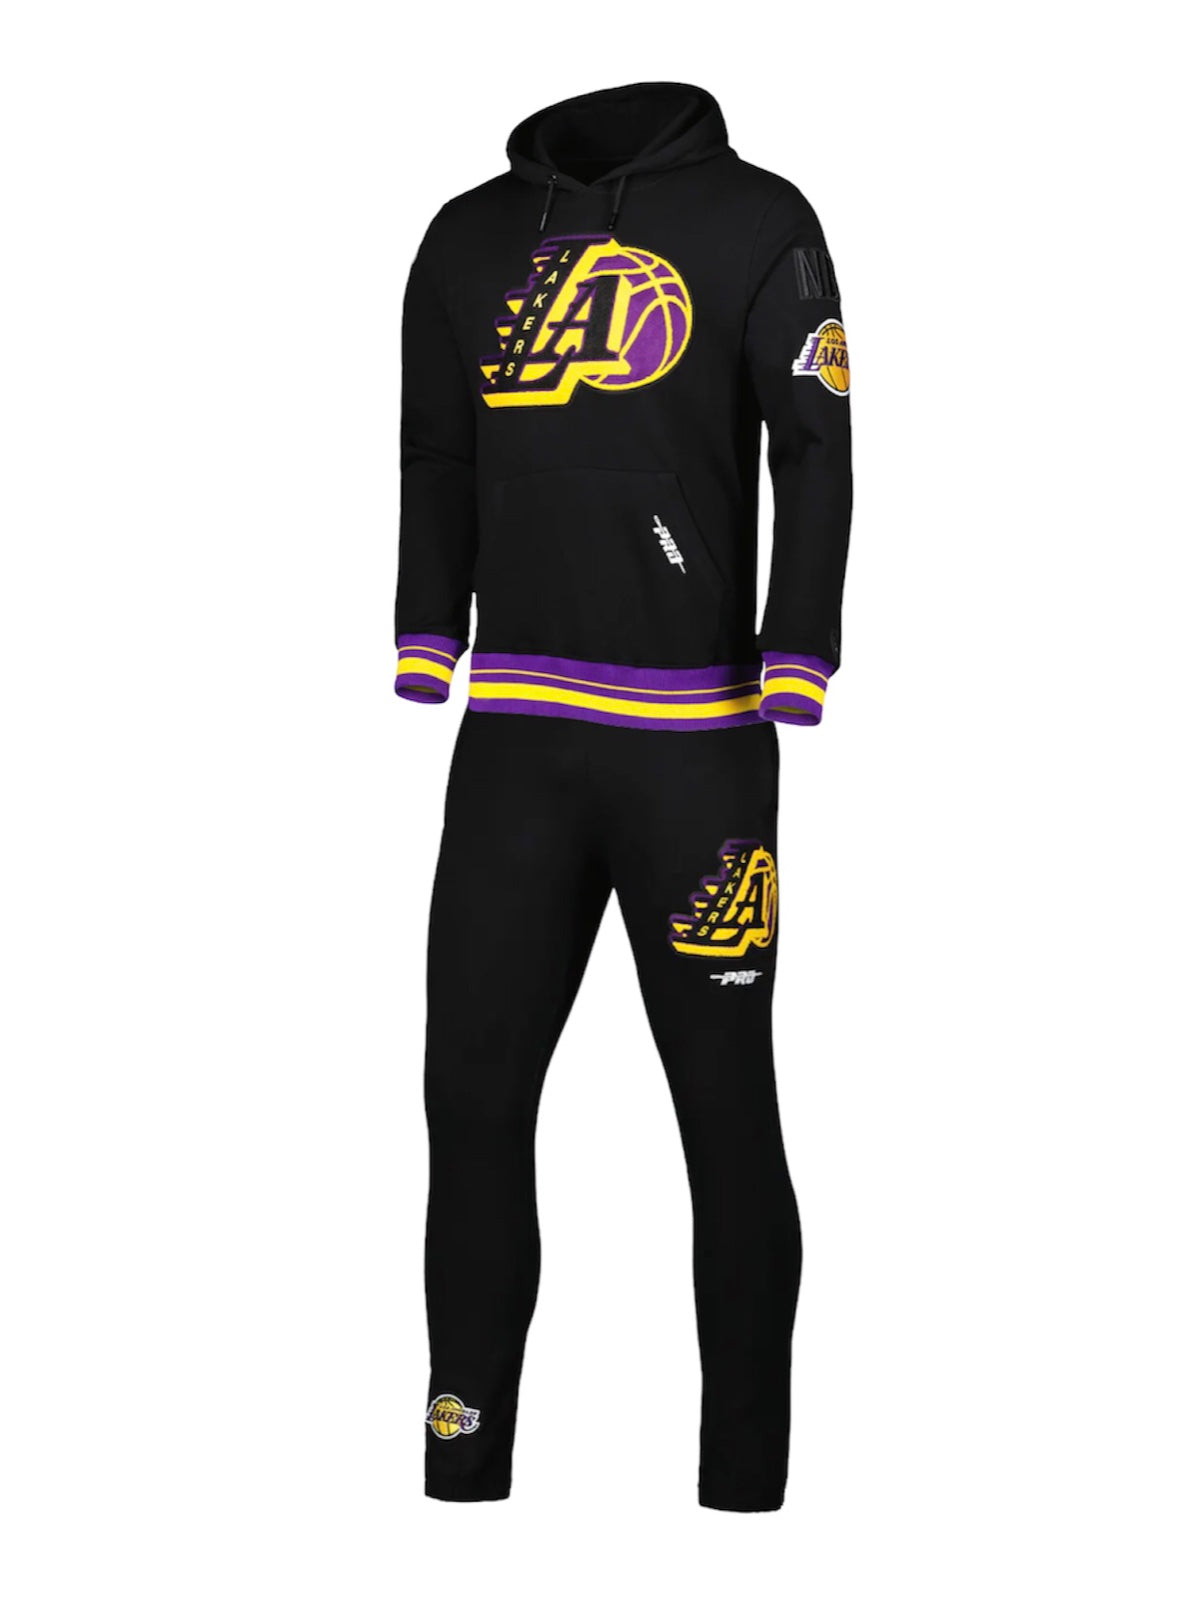 Los Angeles Lakers NBA Express Twill Logo Hoodie - Black by Bulletin - Cotton/Polyester Blend - Size Large - SportBuff